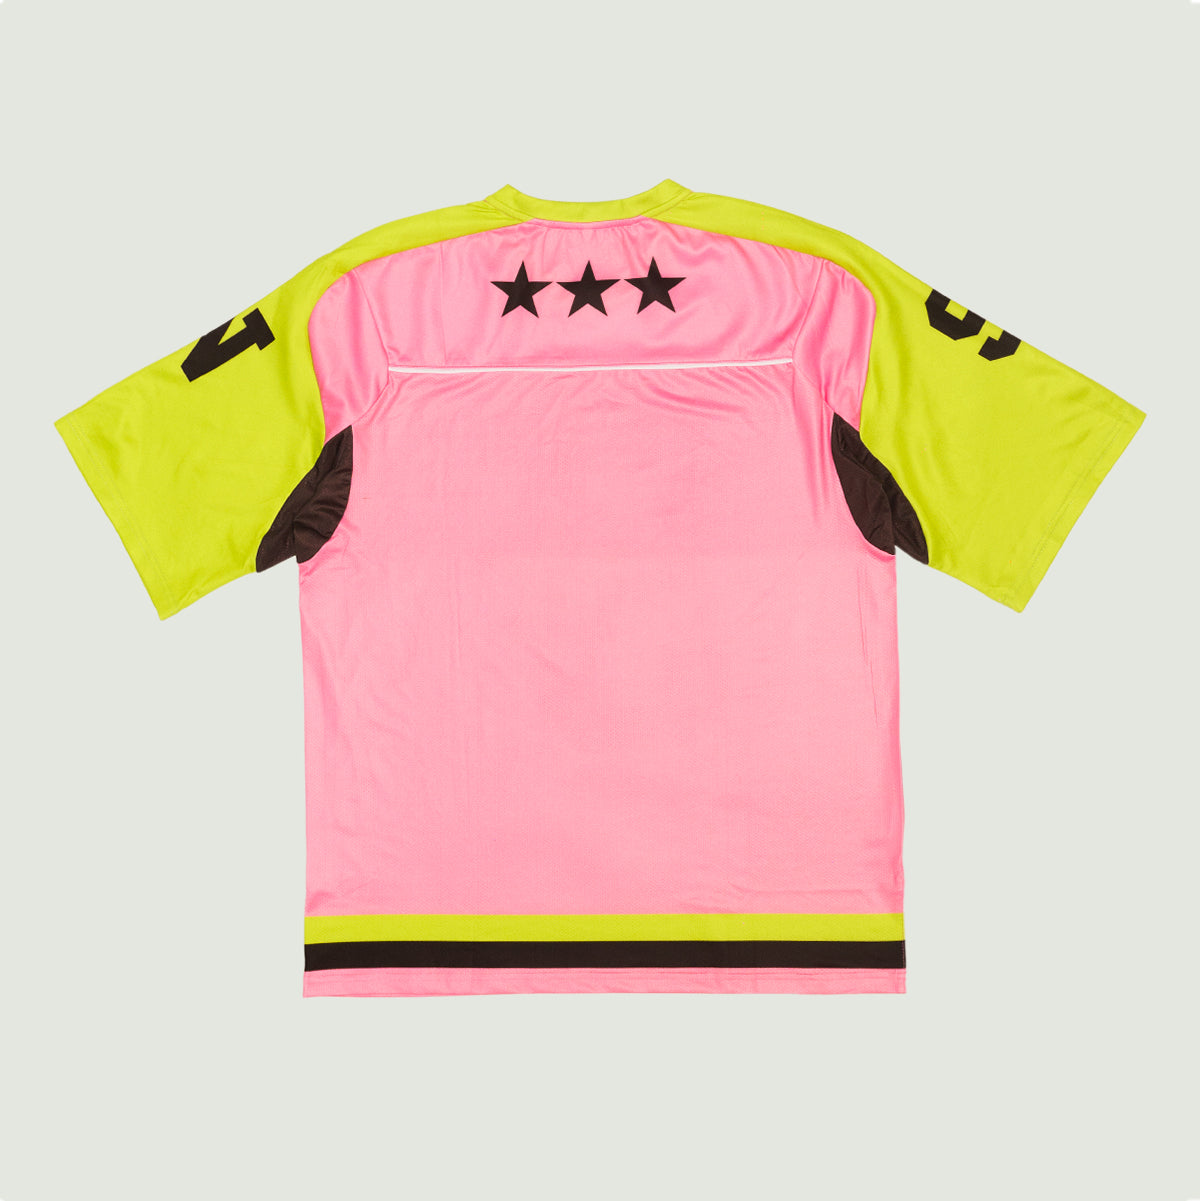 S STAR CLASSIC NFL JERSEY (Pink)